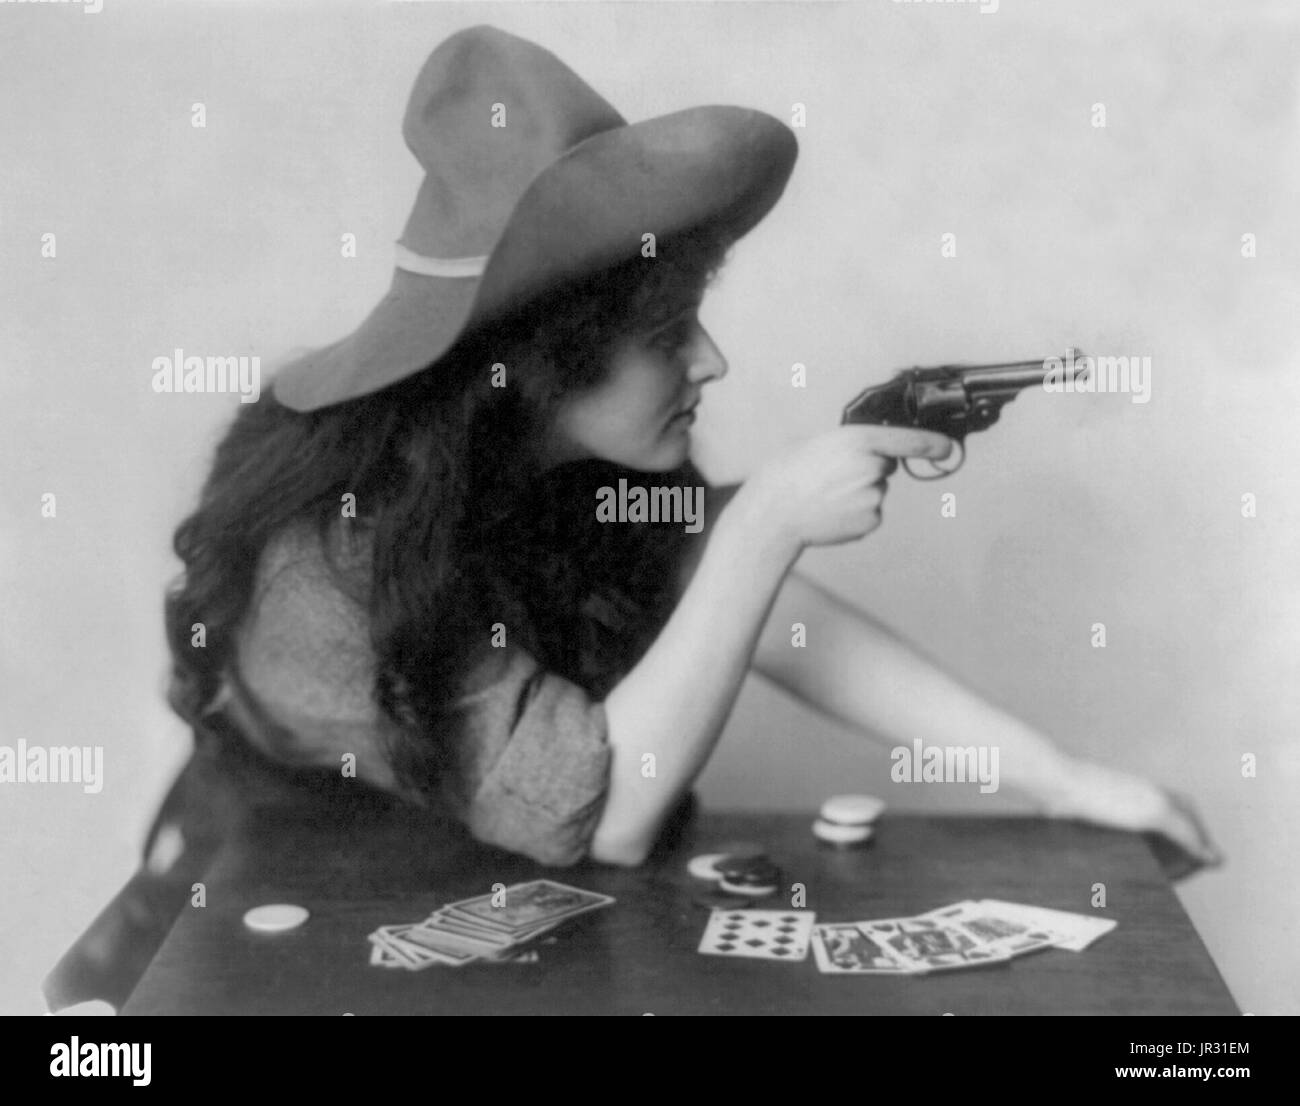 Woman in cowgirl clothing, seated at table with deck of cards and chips, pointing pistol, with arm on table. The history of women in the west, and women who worked on cattle ranches in particular, is not as well documented as that of men. It wasn't until the advent of Wild West Shows that 'cowgirls' came into their own. These adult women were skilled performers, demonstrating riding, expert marksmanship, and trick roping that entertained audiences around the world. Women such as Annie Oakley became household names. By 1900, skirts split for riding astride became popular, and allowed women to c Stock Photo